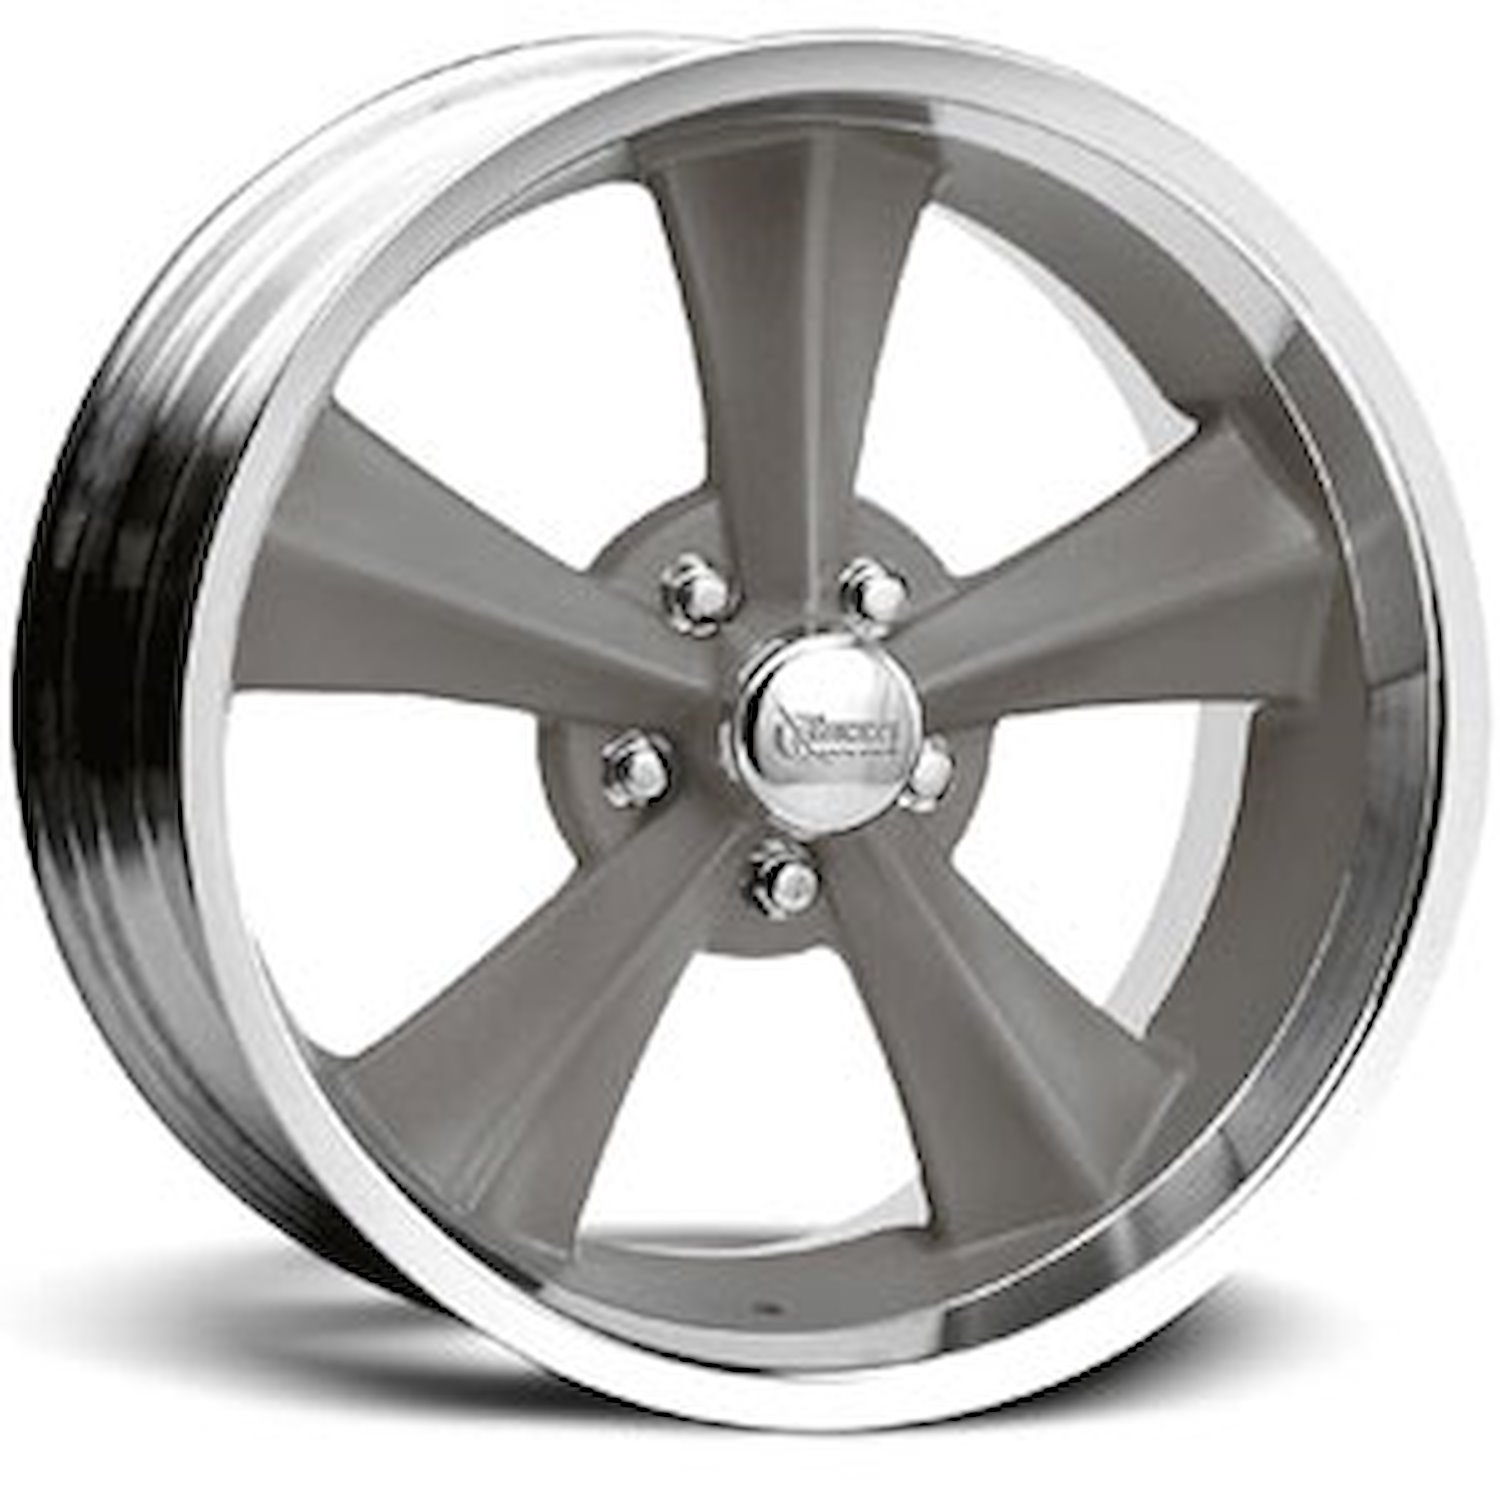 Booster Wheel - Gray Size: 18" x 7"